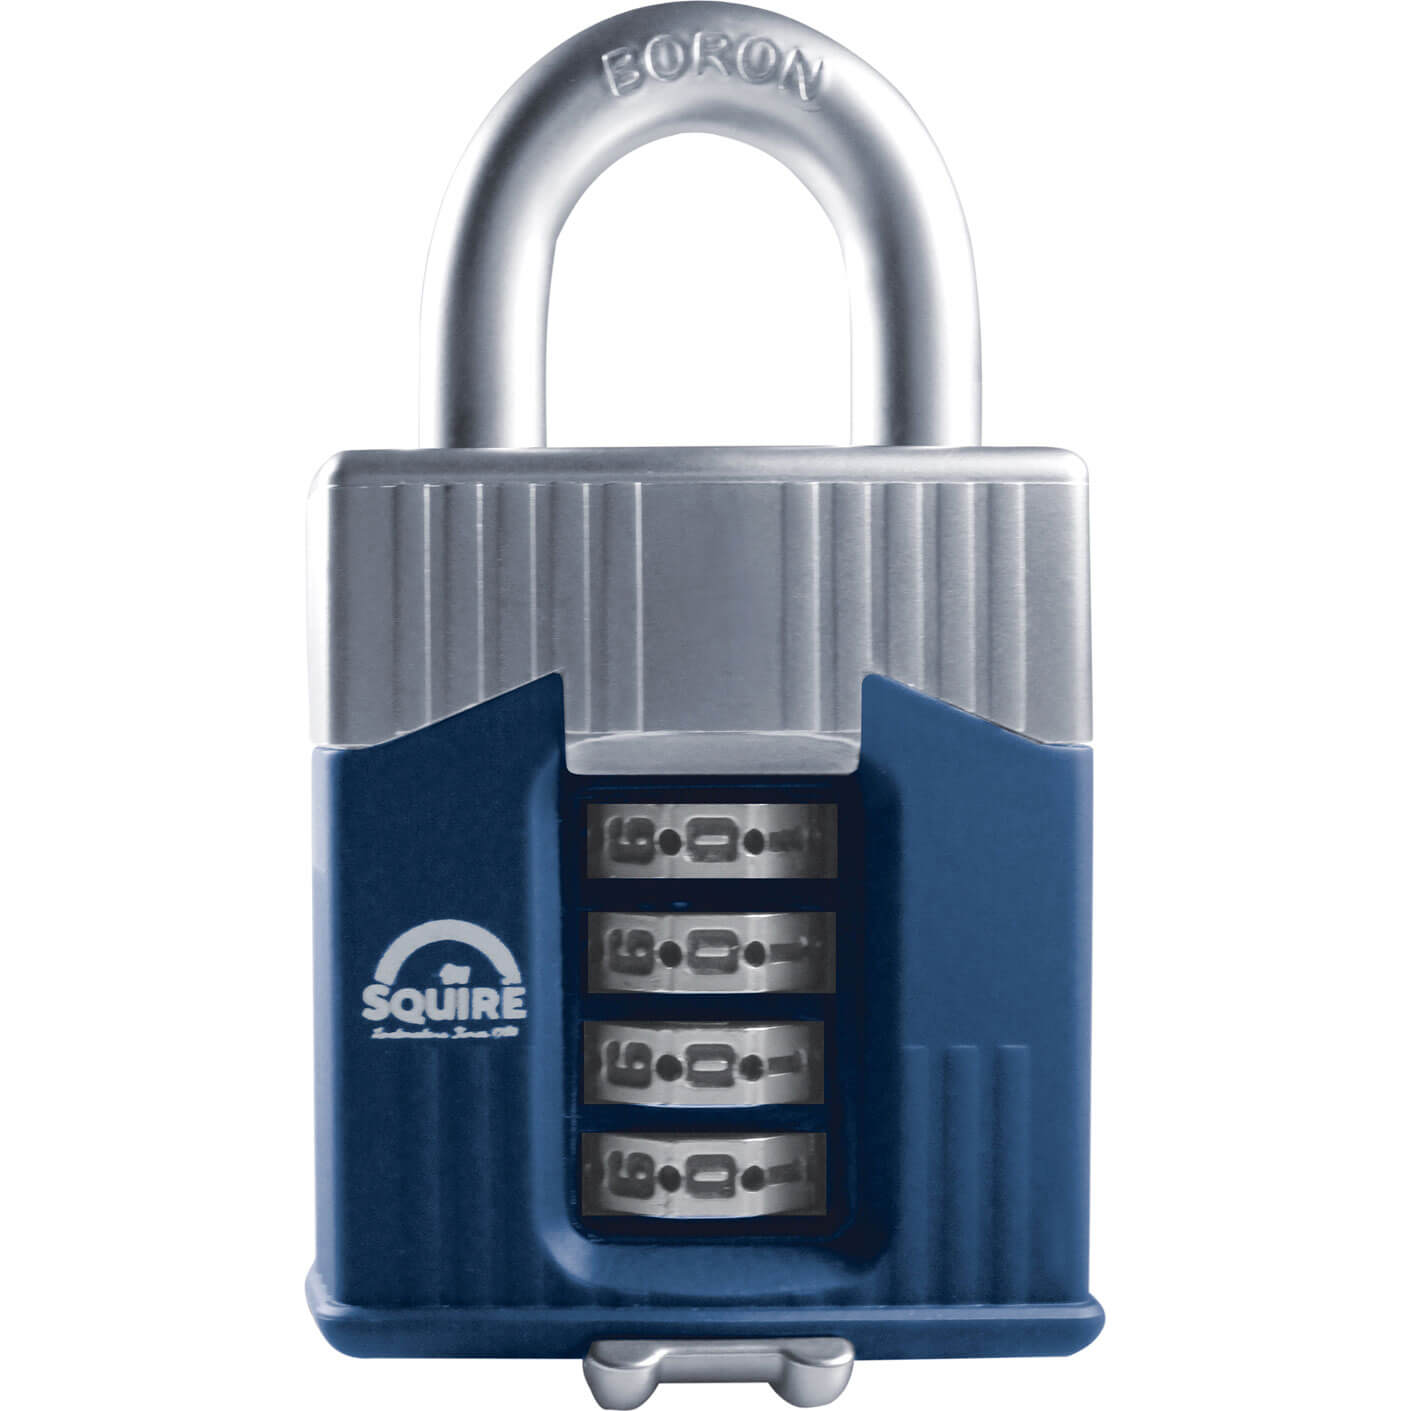 Henry Squire Warrior High Security Shackle Combination Padlock 45mm Standard